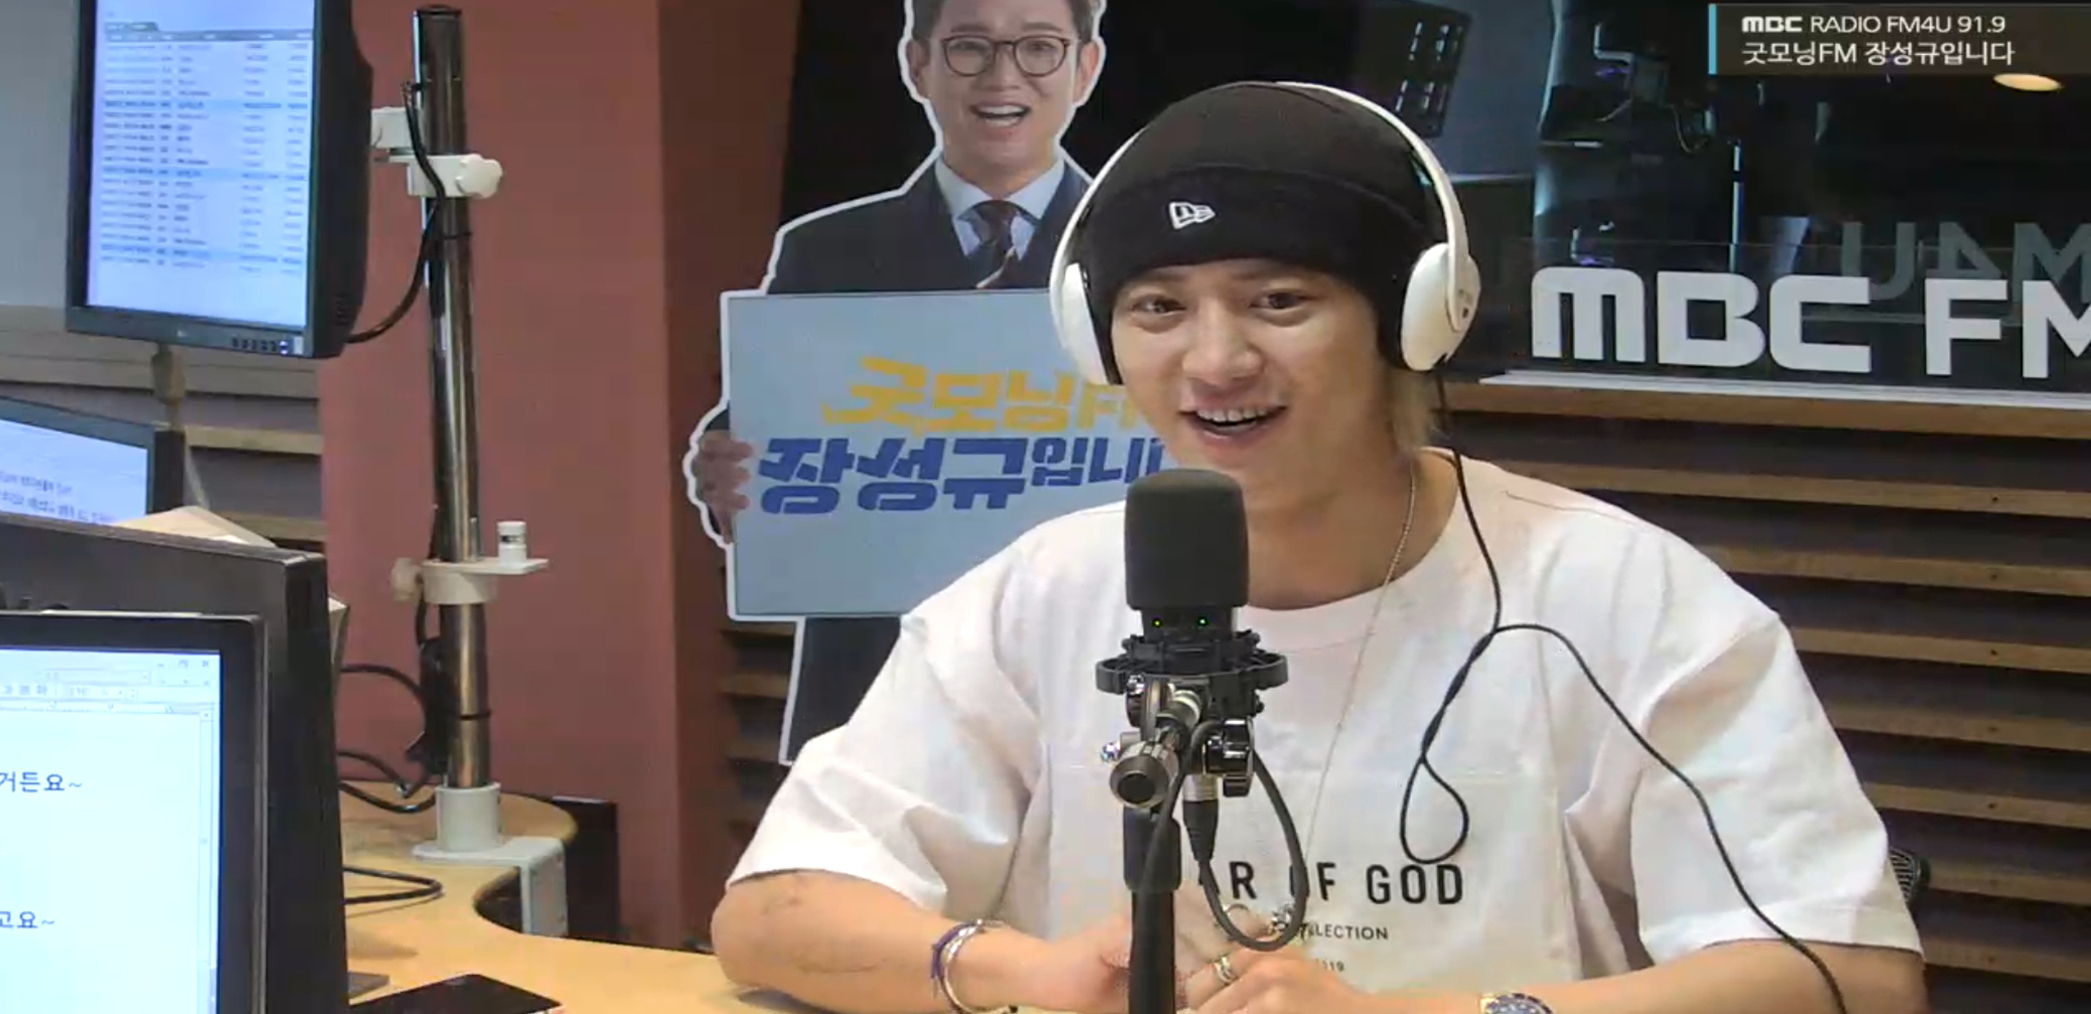 On the 22nd, English VinglishFM Jang Sung-kyu and Over the Line corner, Chanyeol, who is working as EXO Sehun & Chanyeol unit, appeared.On this day, Chanyeol introduced the style of each song and the episode related to it through the hearing of Sehun & Chanyeols first regular album 1 billion views.While talking about track Chuck on track 4, Jang Sung-kyu said, Who is the least answer in EXO Dont together?When asked, Chanyeol laughed at the song Sehun that he sang together, and as soon as the question came out, he said that the member who answered the most was himself.I was a little kid, and I was a little bit dwarf and bullied a lot. It became a habit to fold wings.It caught my eye. It adds to the song, adding to the feature of the gag, and it contains a message that you can spread your wings now.Meanwhile, MBC FM4U (91.9MHz) English VinglishFM Jang Sung-kyu is held every day from 7 a.m. to 9 a.m. and broadcasts through MBC FM4U (Seoul and Gyeonggi 91.9MHz) and radio application mini.iMBC Kim Eun-Byeol  Screen Capture MBC